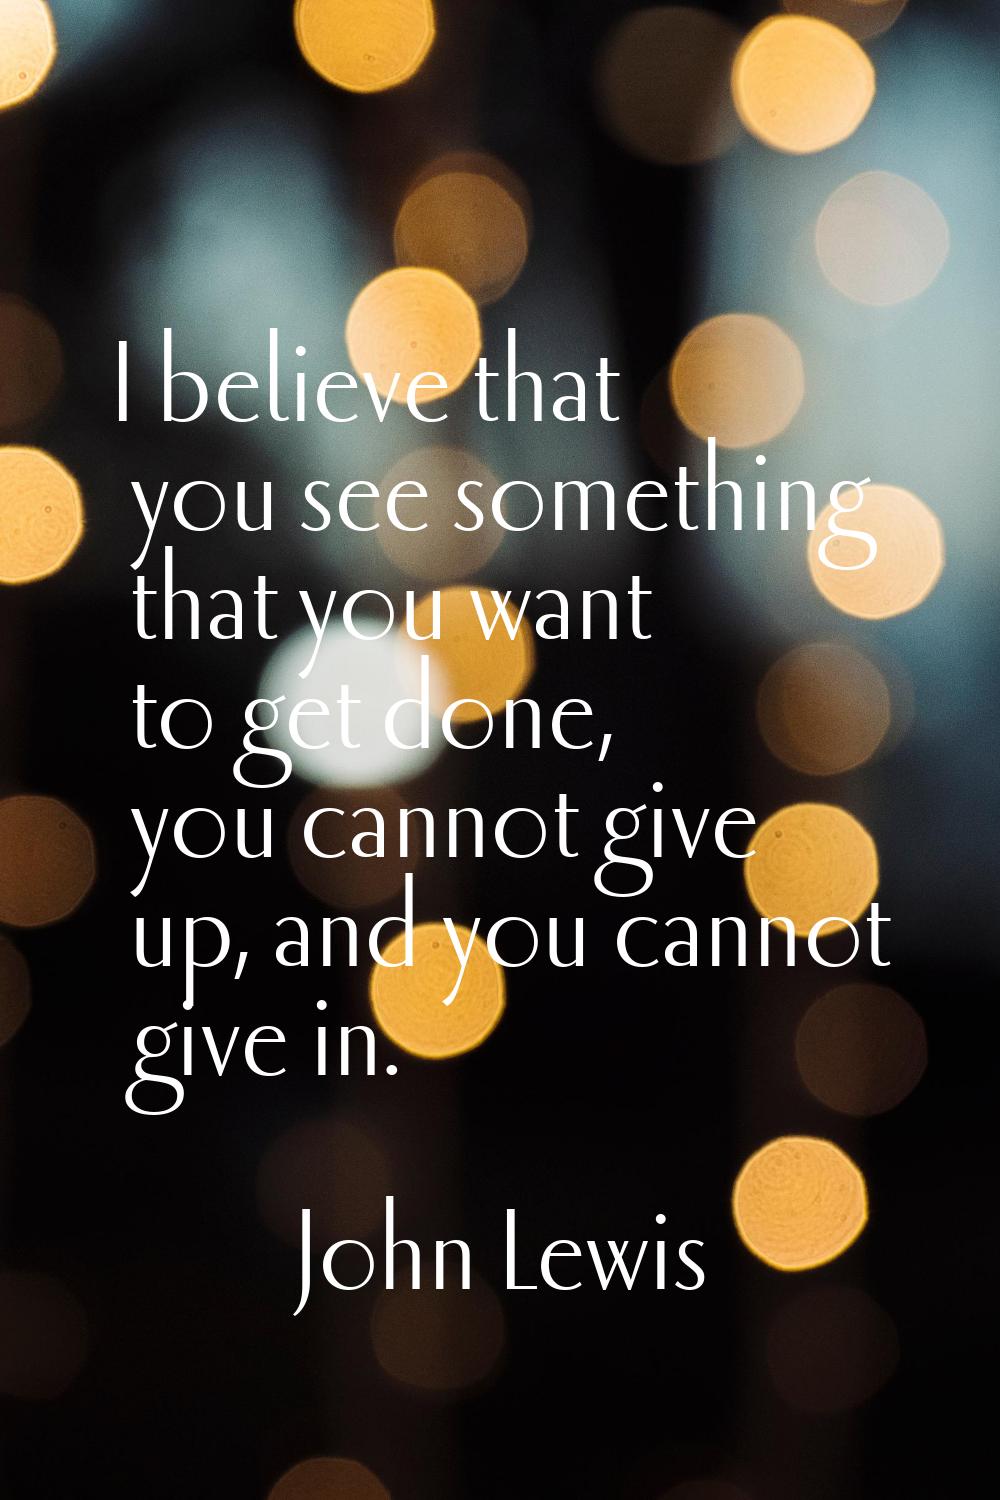 I believe that you see something that you want to get done, you cannot give up, and you cannot give